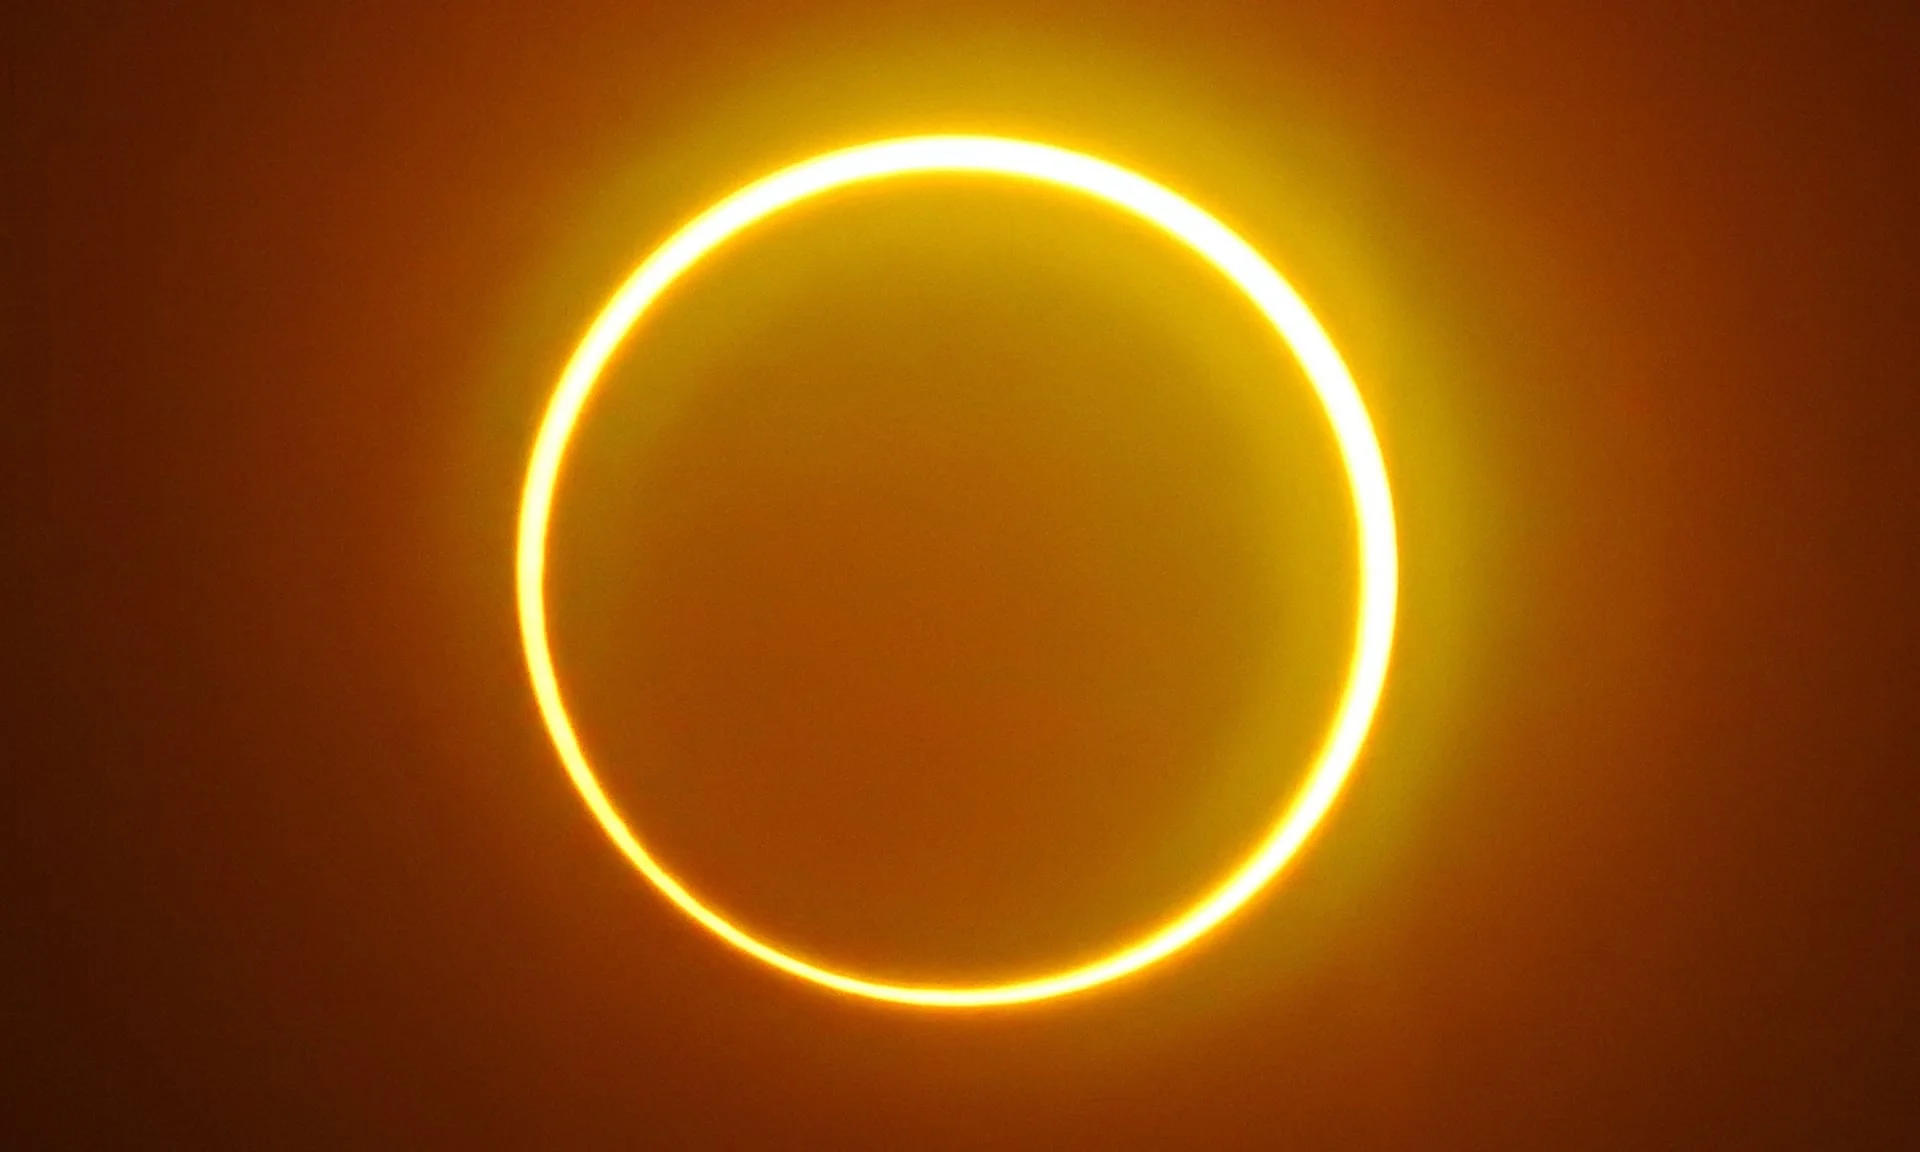 chasing rare ring of fire annular solar eclipse in africa and asia